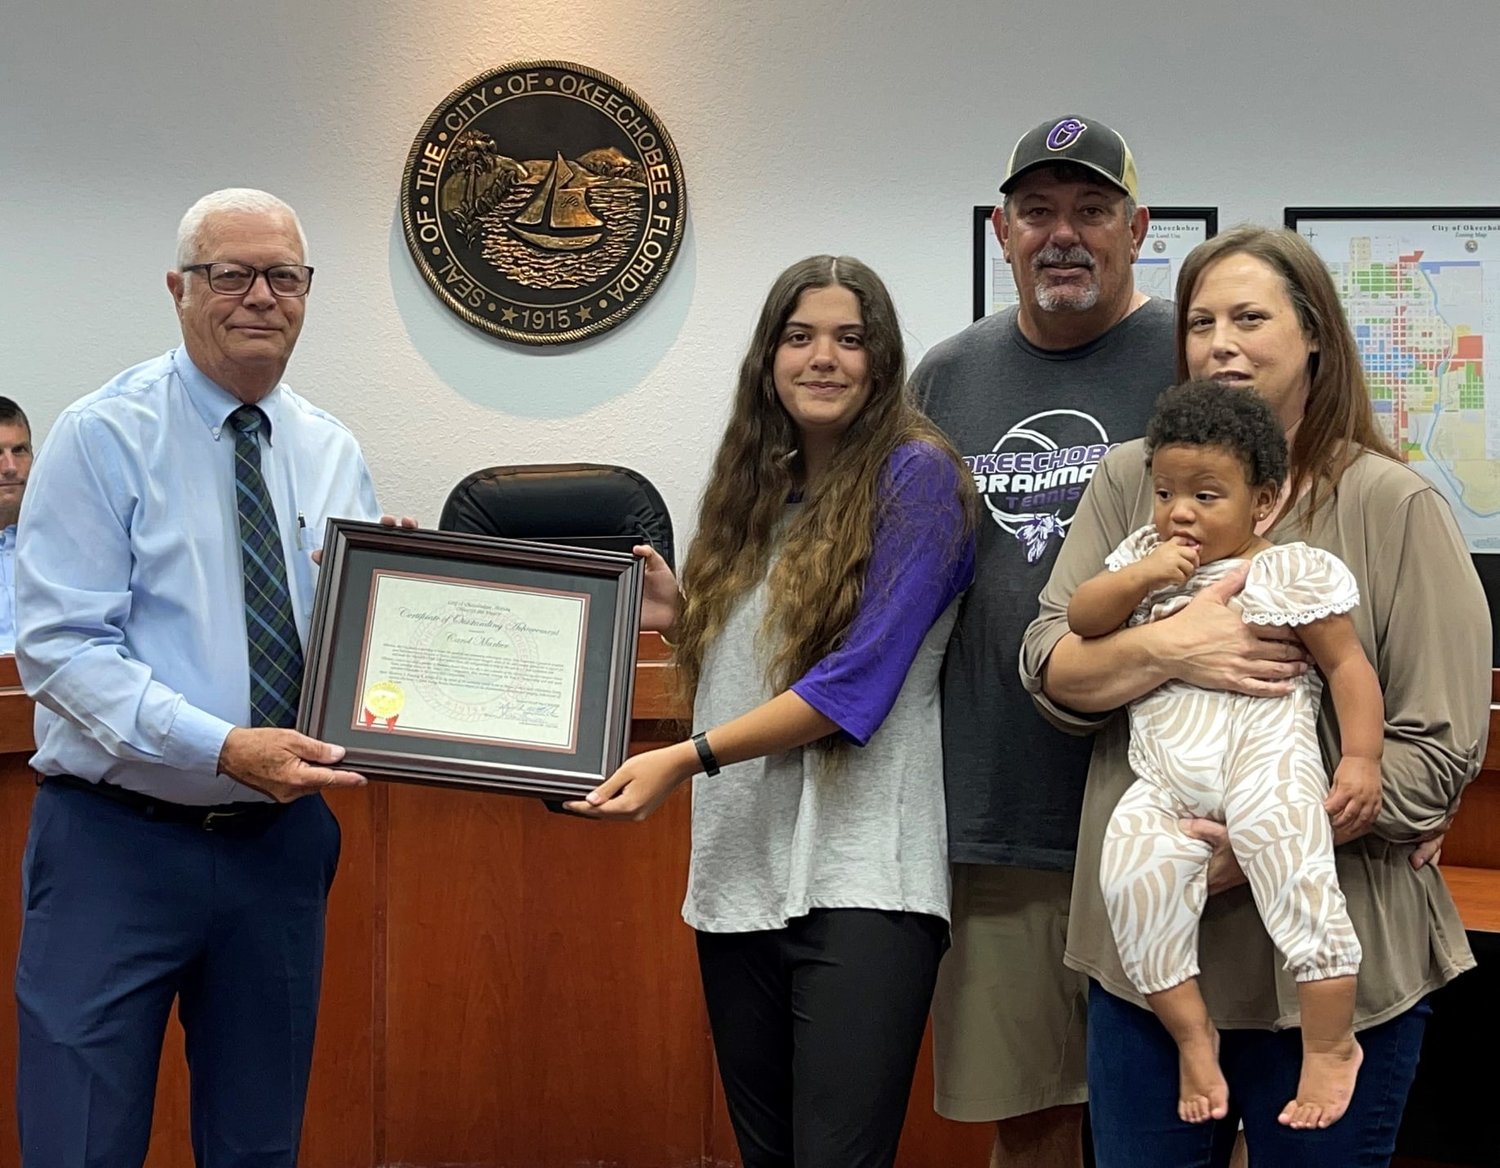 Mayor Dowling Watford (left) presents a certificate of appreciation to Carol Marker (center) as her family looks on proudly.